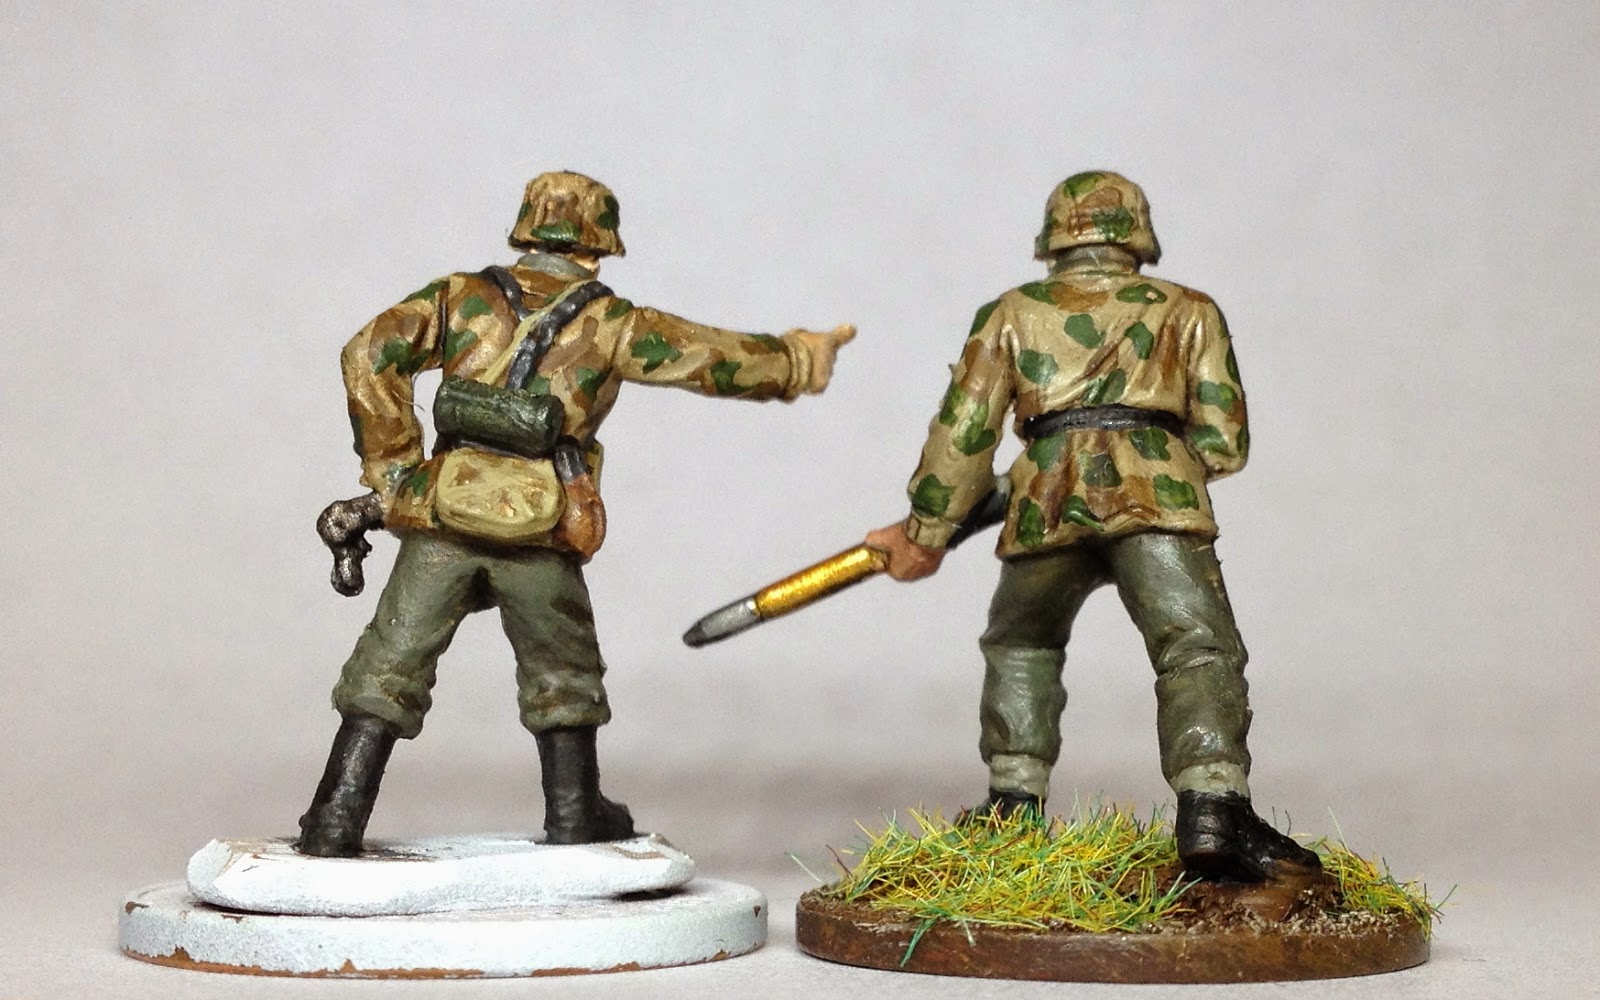 Another Slippery Slope: More Splinter Camo